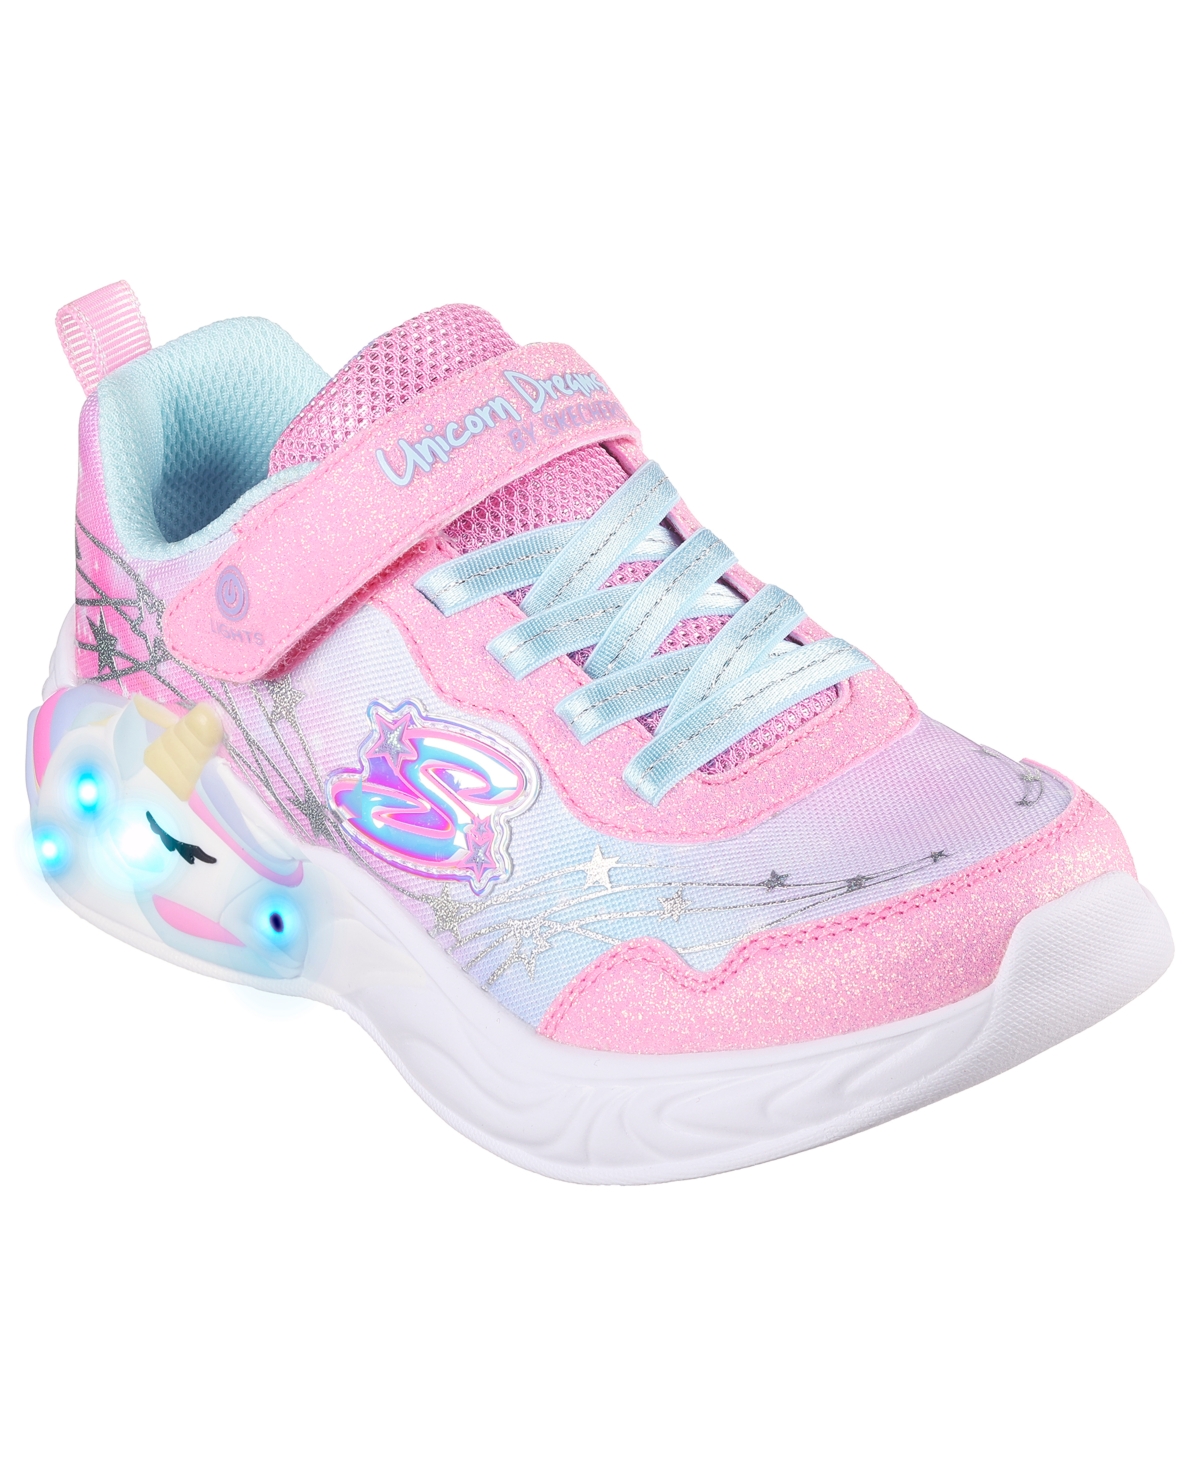 Skechers Kids' Little Girls S Lights- Unicorn Dreams Stay-put Closure Light-up Casual Sneakers From Finish Line In Pink,turquoise